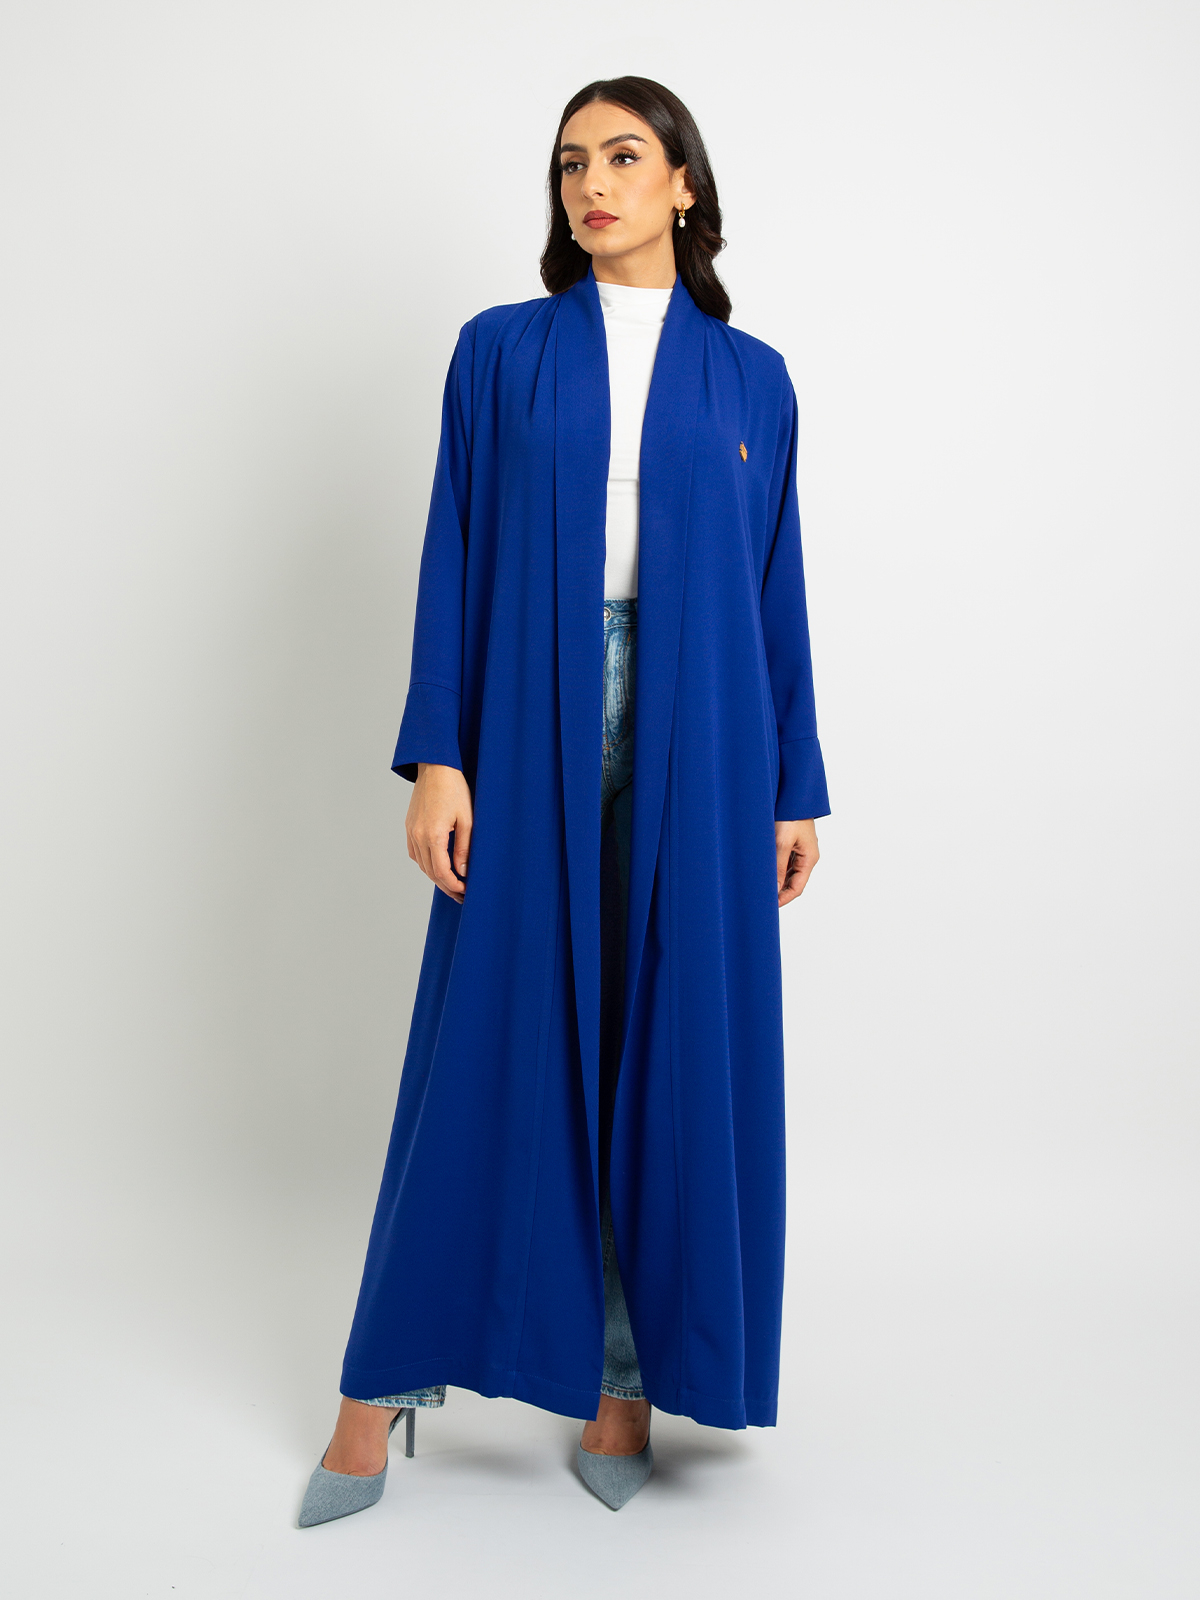 Indigo blue long open practical casual abaya in high quality crepe fabric by kaafmeem for work and everyday wear 